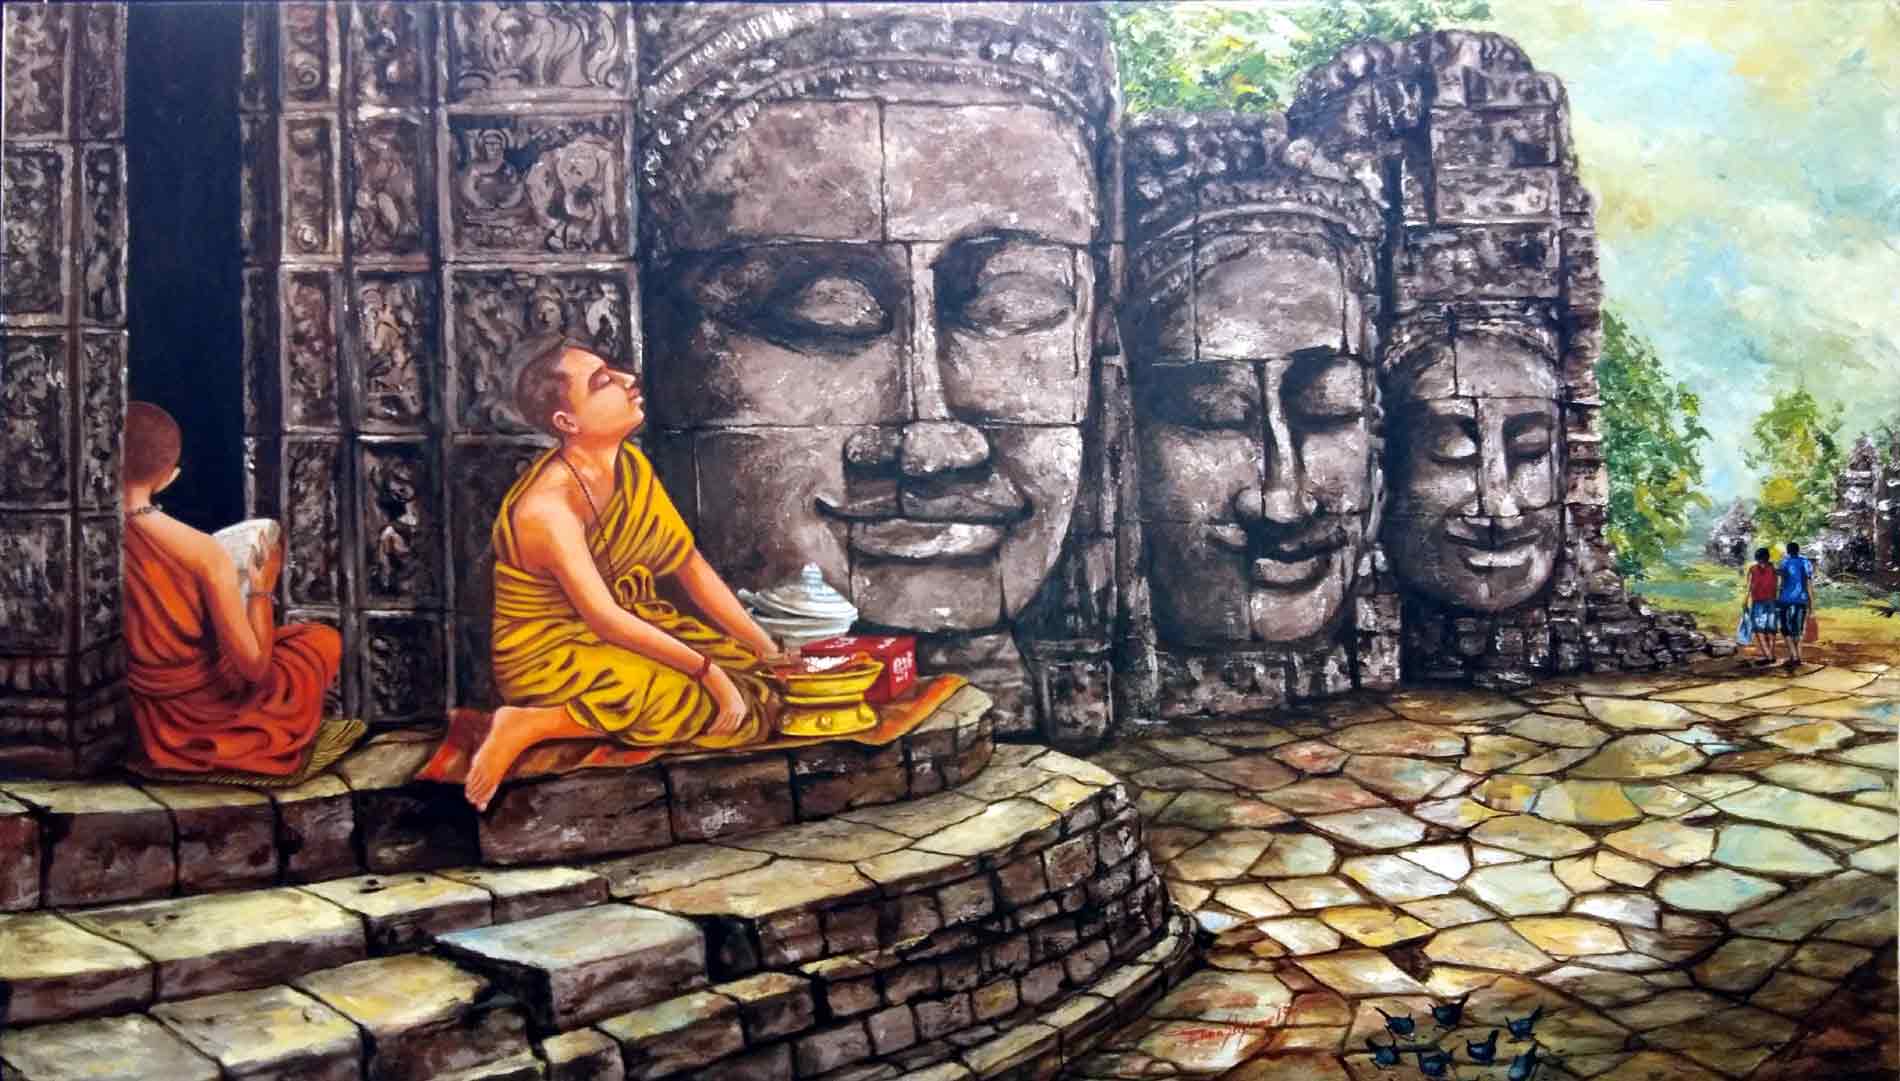 Realism Painting with Acrylic on Canvas "Angkor Wat - 1" art by Ghanshyam Kashyap